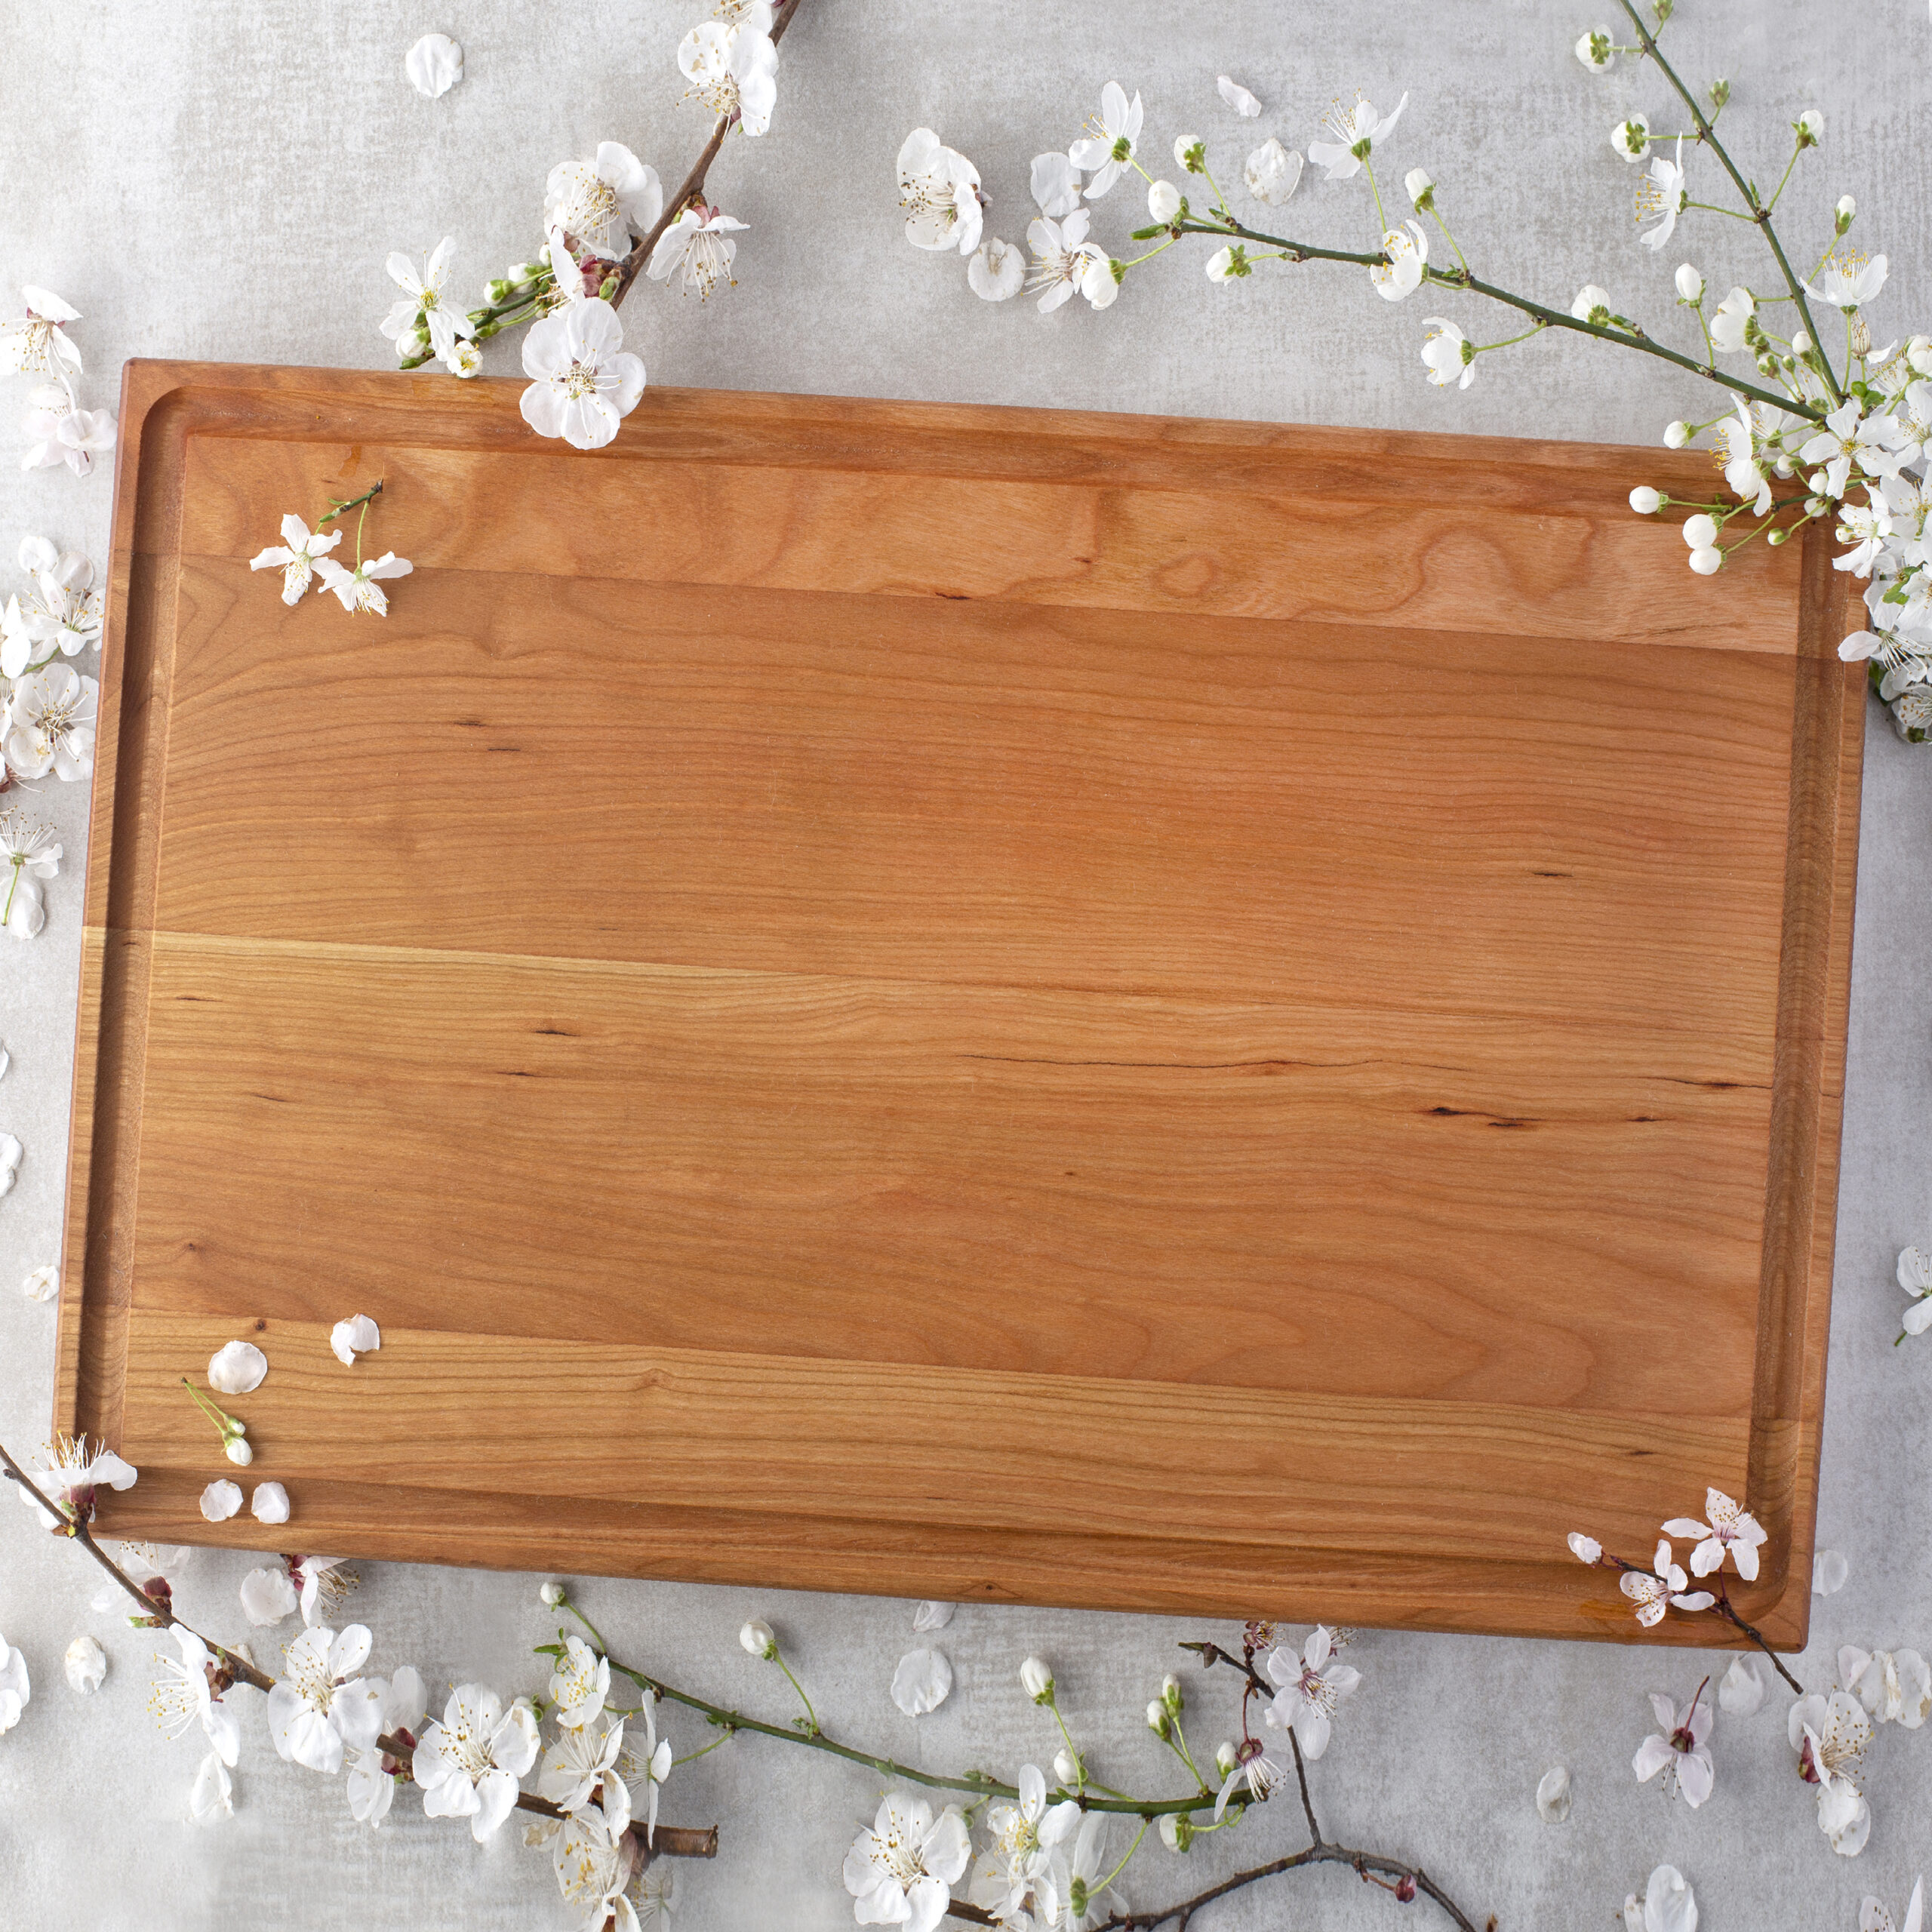 https://forest-decor.com/wp-content/uploads/Large-Wood-Cutting-Board-with-Juice-Groove-Cherry-17x11-2-scaled.jpg